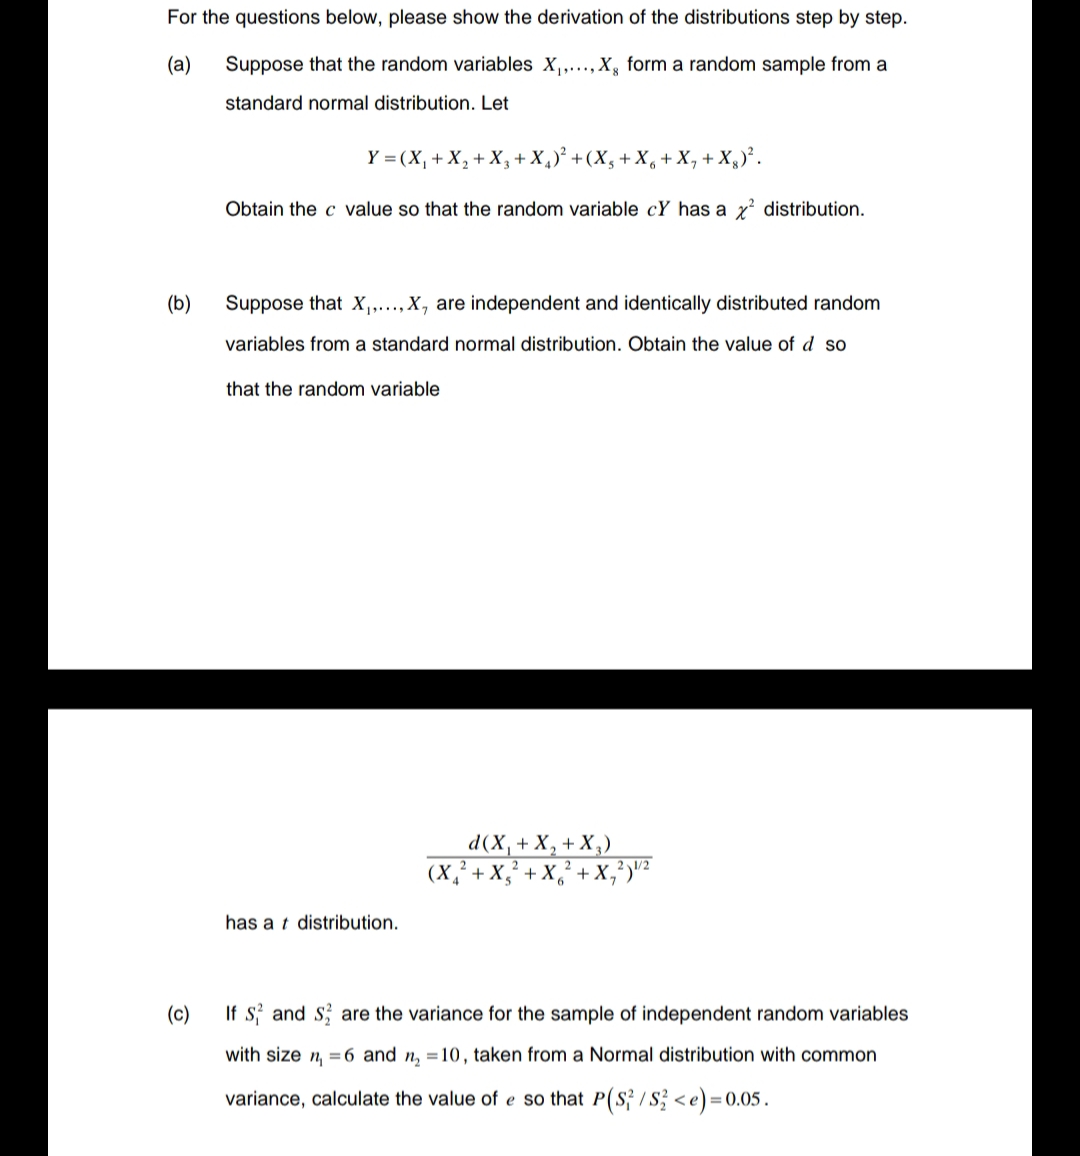 For the questions below, please show the derivation of the distributions step by step.
(a)
Suppose that the random variables X₁,..., X, form a random sample from a
standard normal distribution. Let
(b)
Y = (X₁ + X₂ + X₂ + X₁)² + (X₂ + X6 + X₁ + X)².
Obtain the c value so that the random variable cY has a x² distribution.
Suppose that X₁,..., X, are independent and identically distributed random
variables from a standard normal distribution. Obtain the value of d so
that the random variable
has at distribution.
d(x₁ - + X₂ + X₂)
(X₂²+X₂²+X₂²
X,²)/²
(c)
If S and S are the variance for the sample of independent random variables
with size n₁ = 6 and n₂ =10, taken from a Normal distribution with common
variance, calculate the value of e so that P(S²/S2 <e)=0.05.